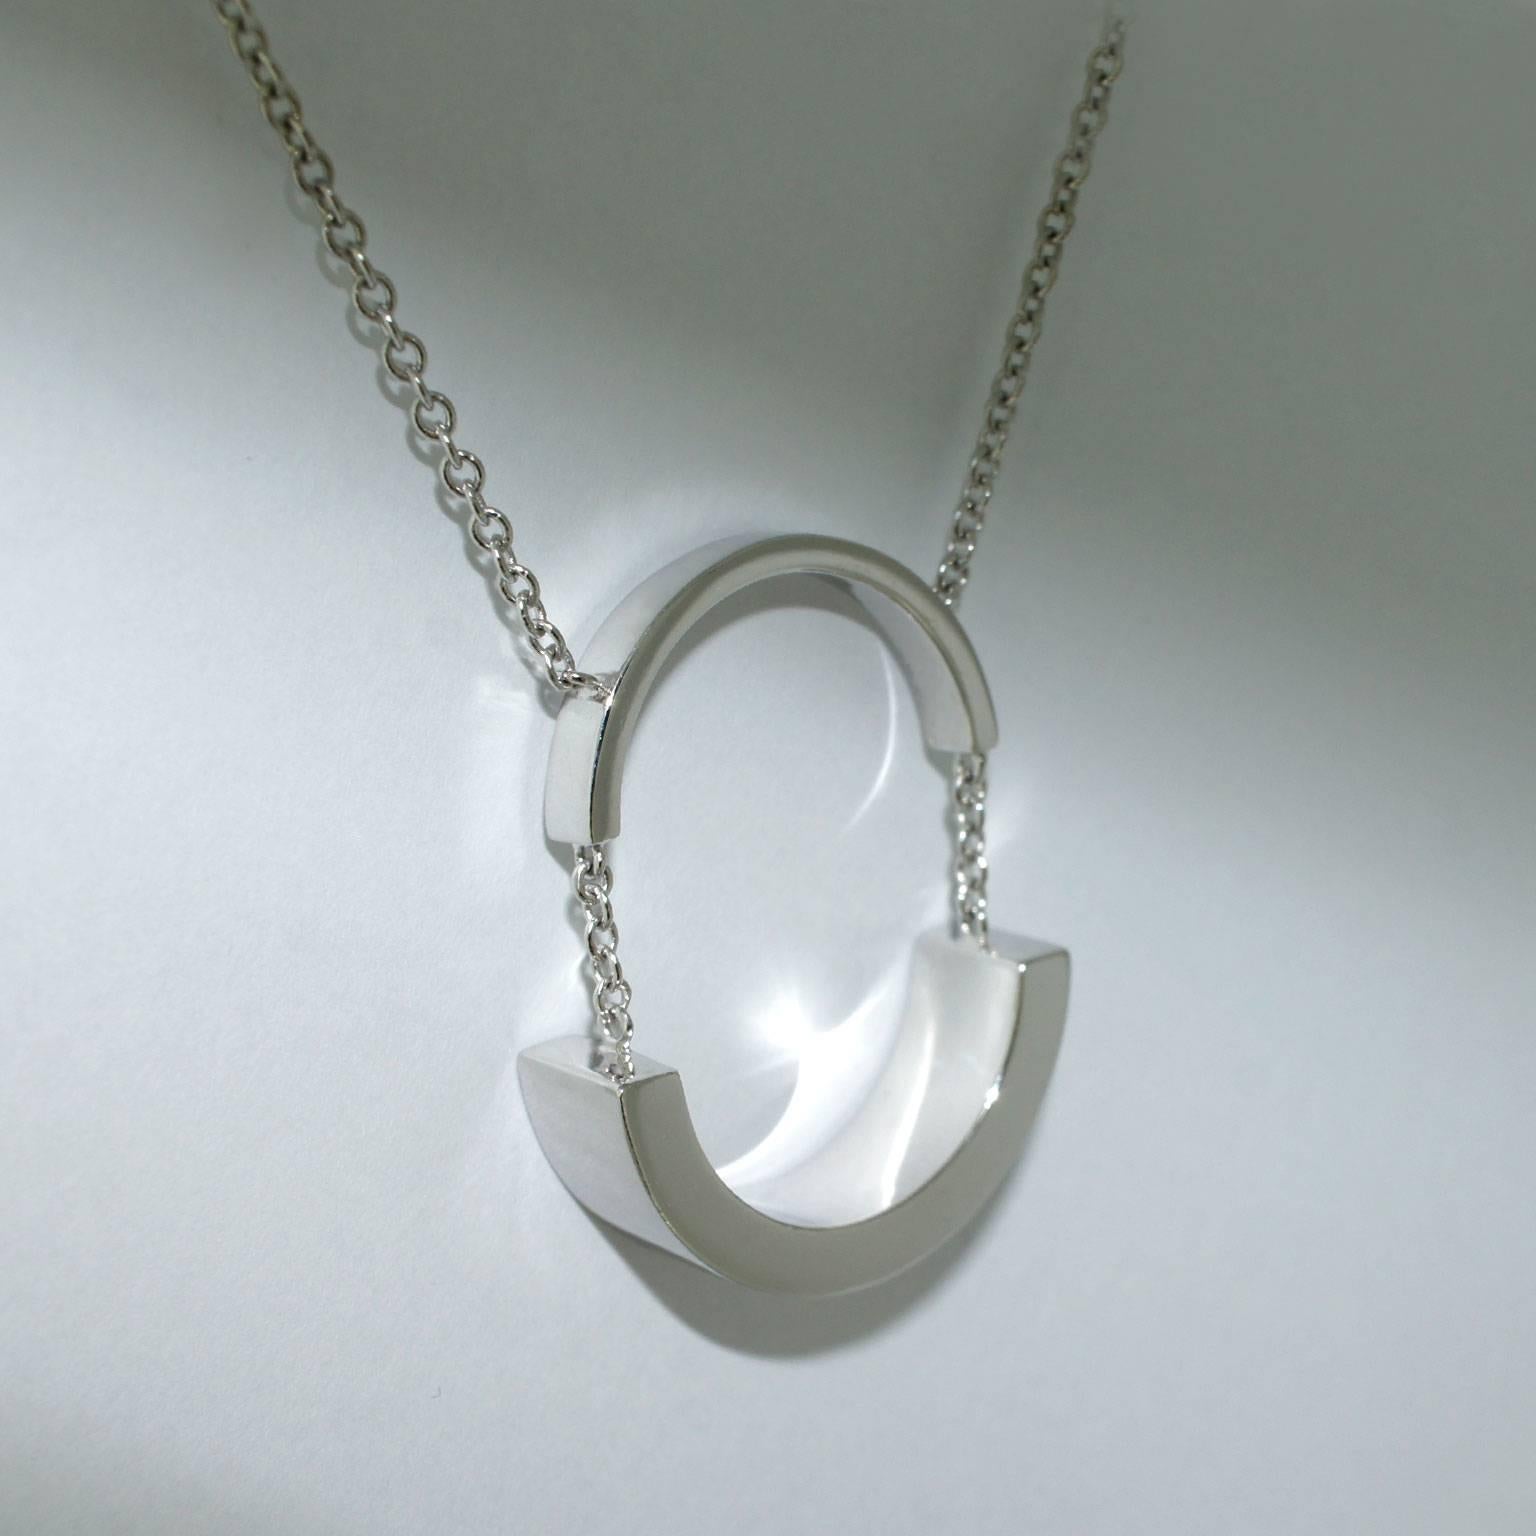 Lizunova Geometric Pendant Necklace in White Gold In New Condition For Sale In Sydney, NSW